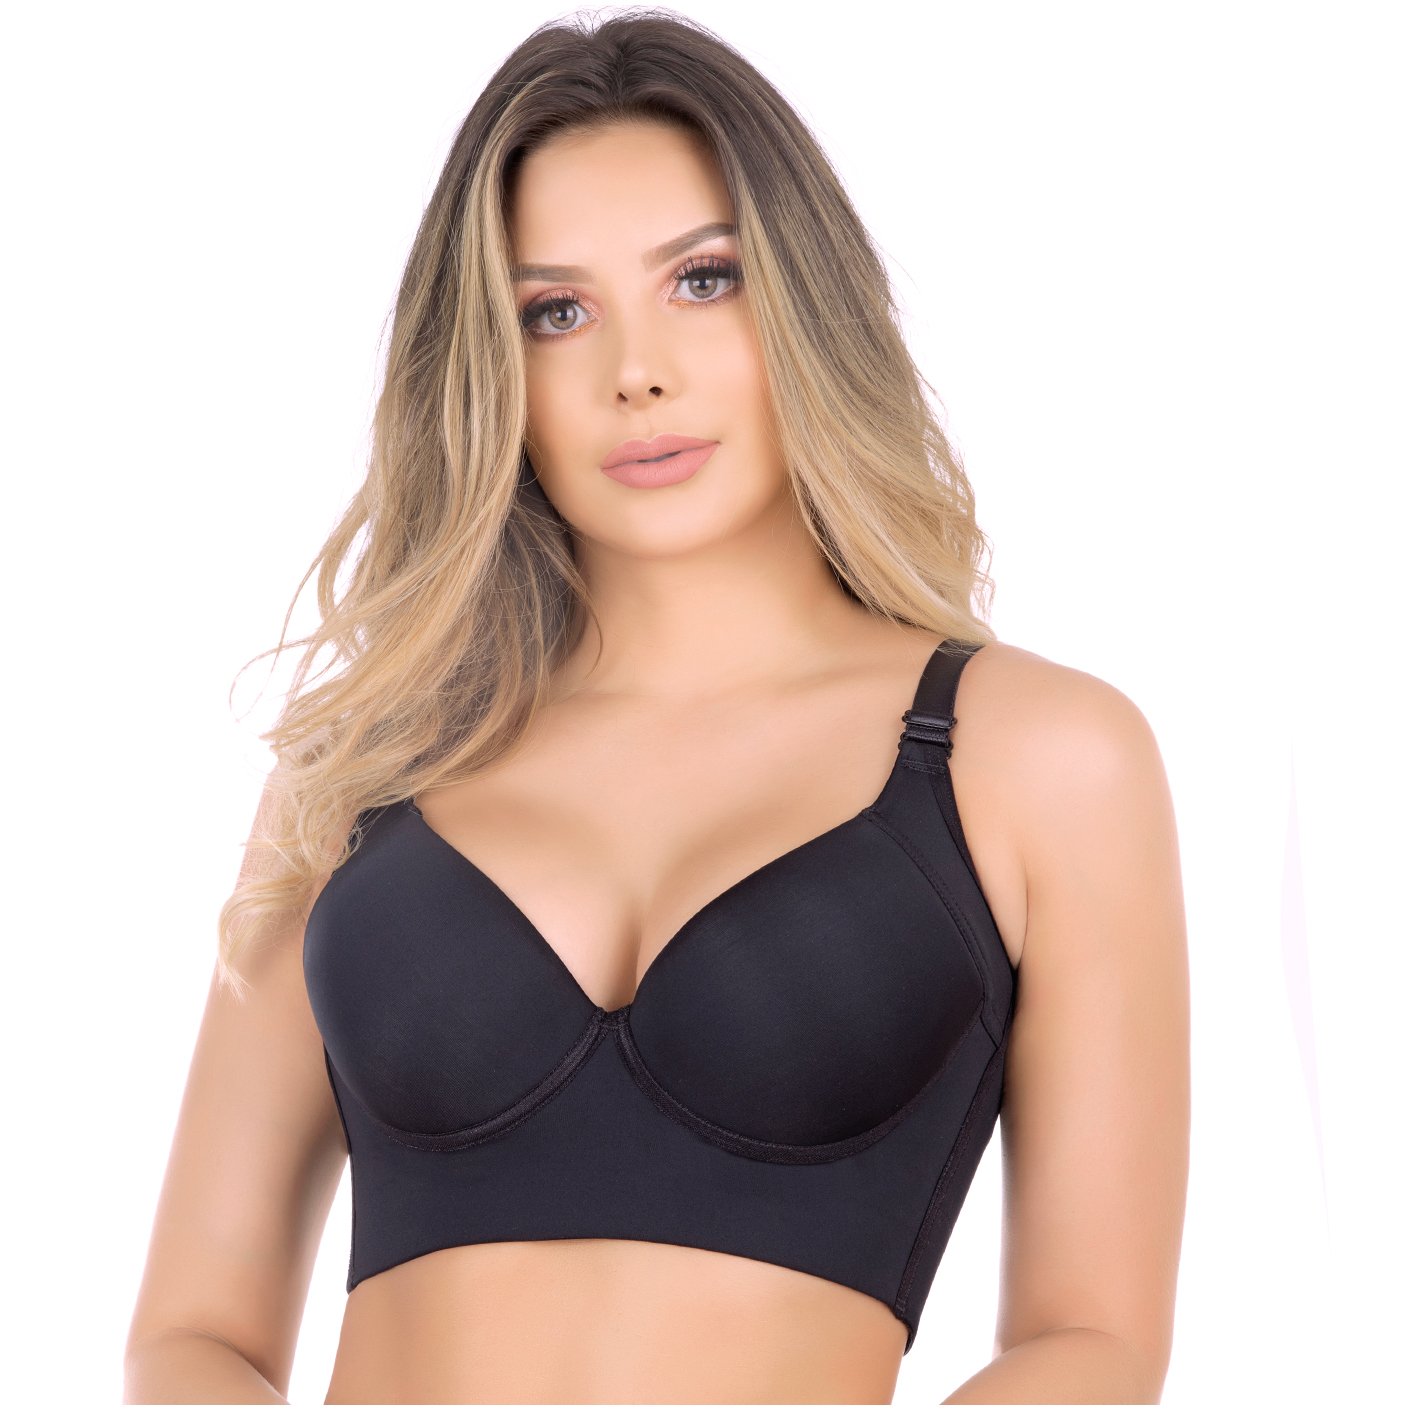 UPLADY 8034 FIRM CONTROL STRAPLESS BRA FOR WOMEN (Size: 36C/L, Color: Black)